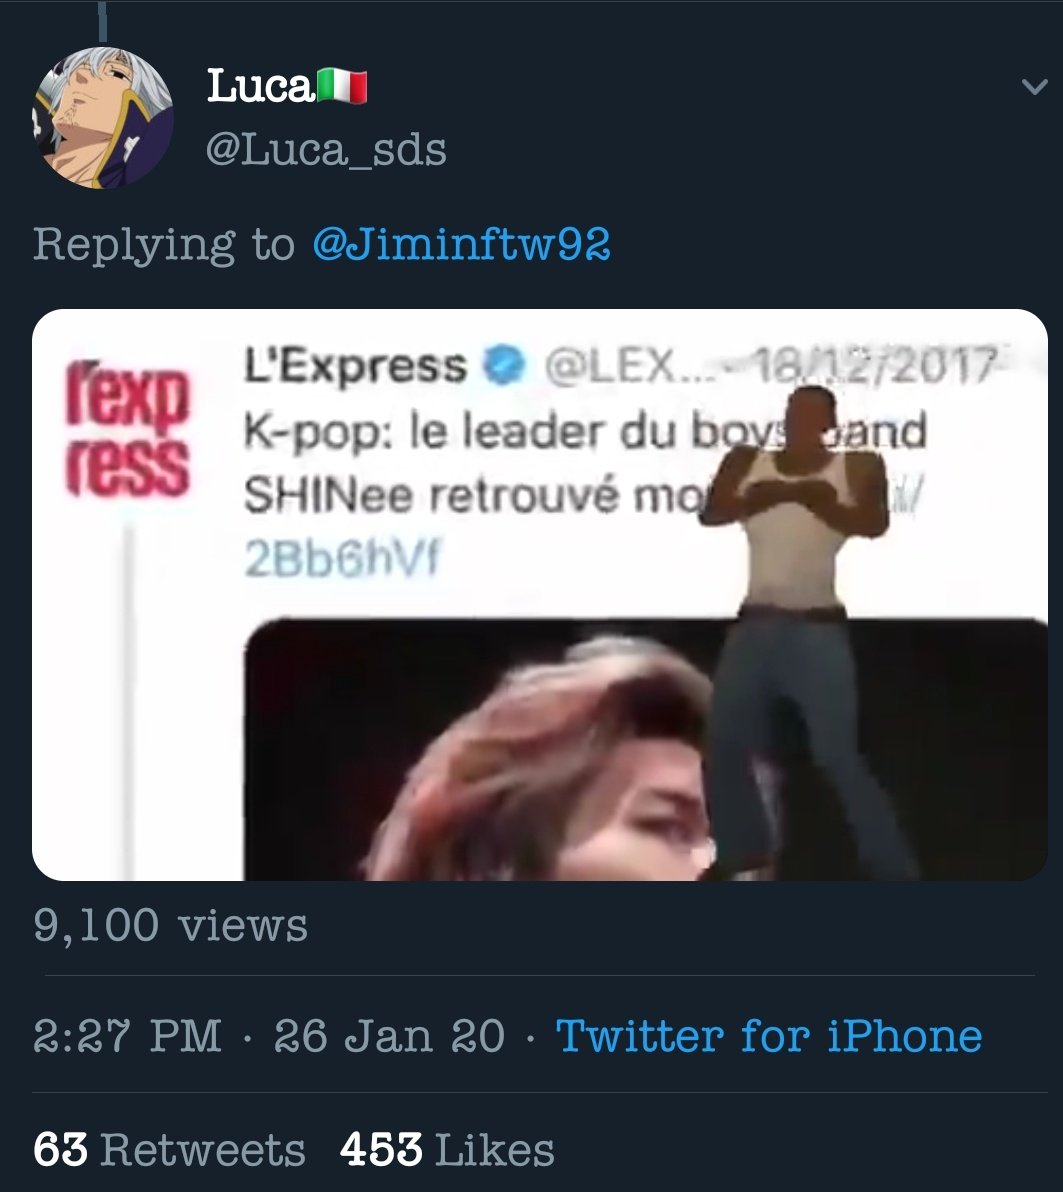 @/luca_sds For responding to fancams with a hurtful video of Jonghyun.